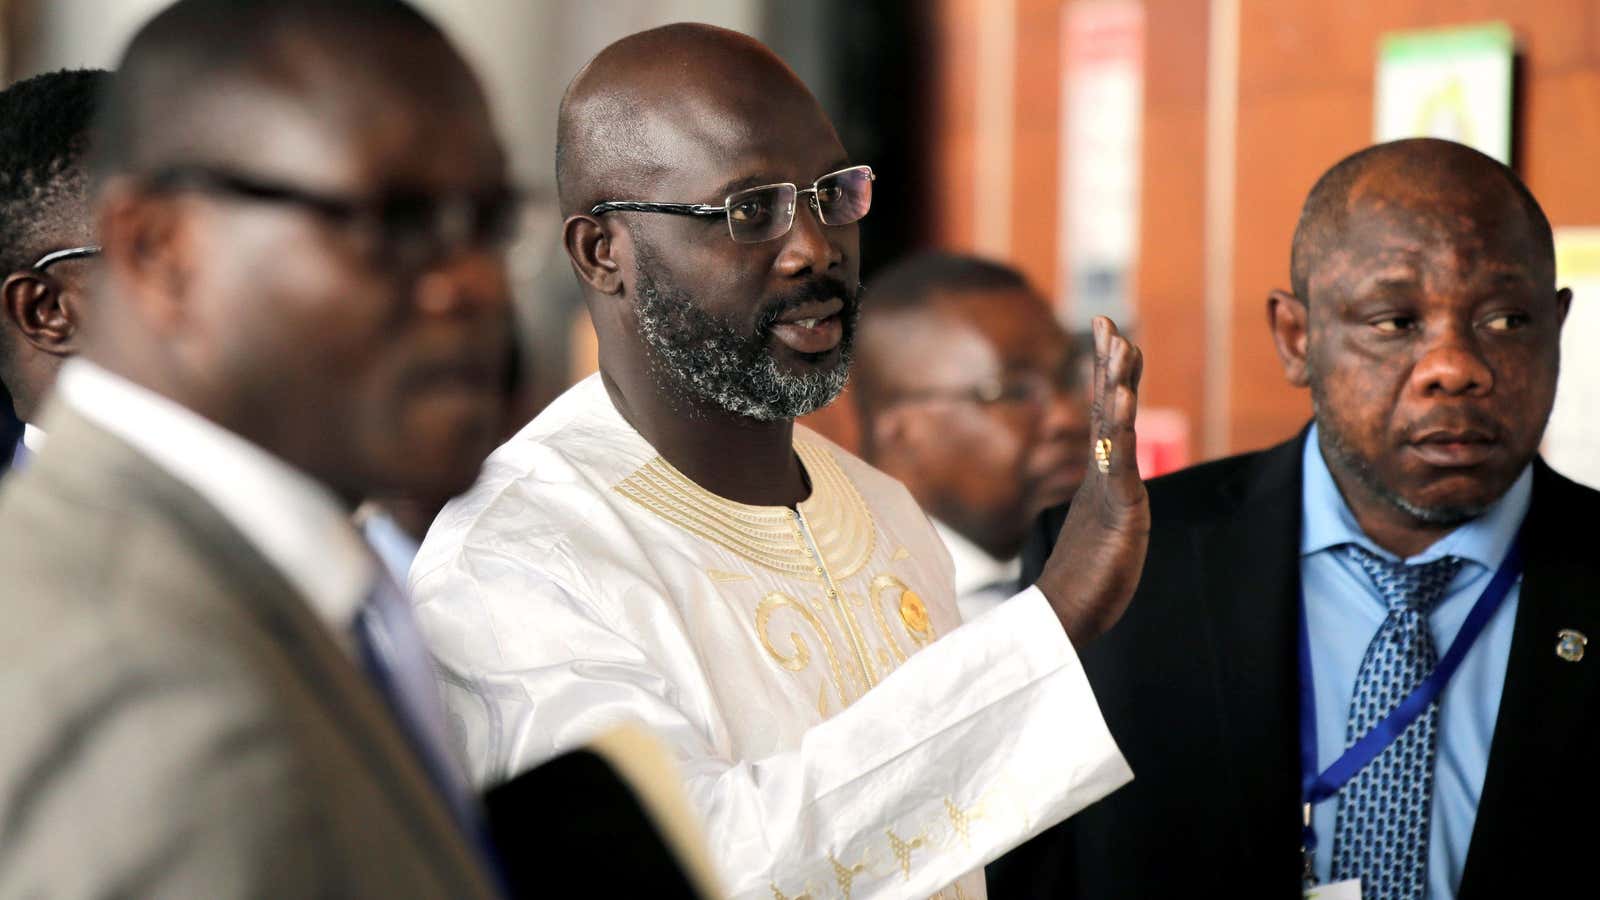 “Stop. How much?”
Liberia’s president George Weah